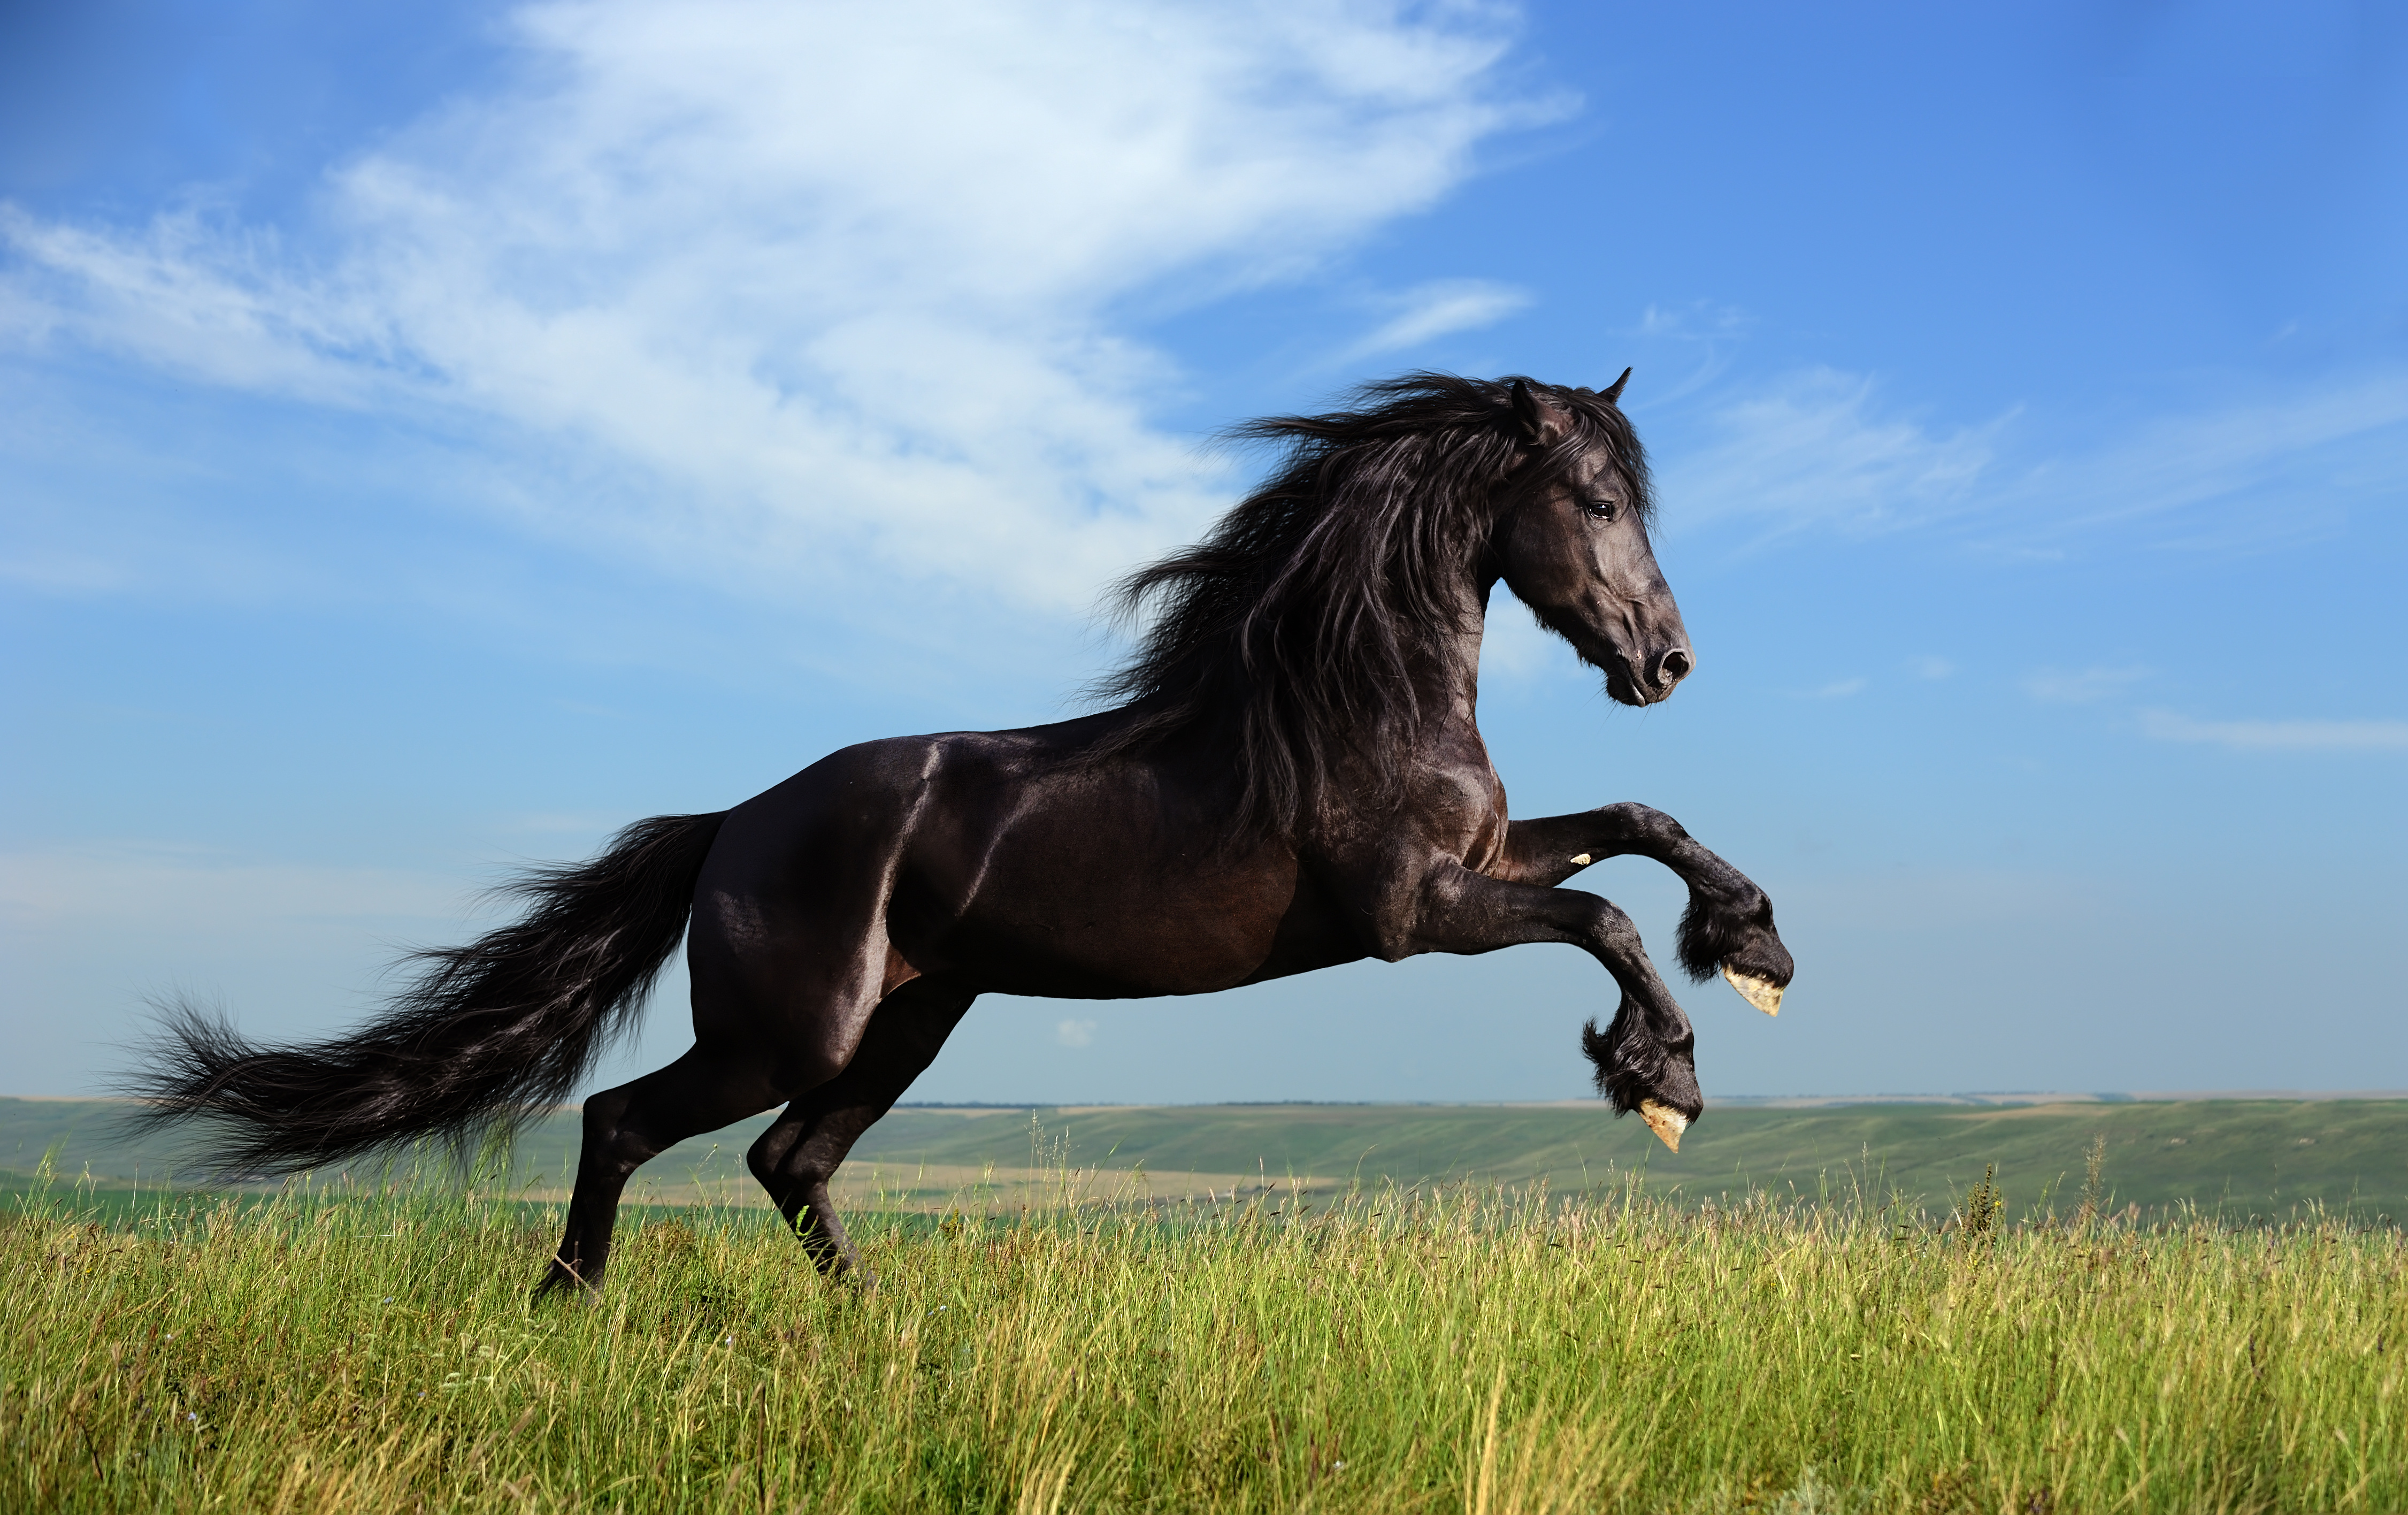 Safety Tips to Follow While Riding Vacation Horses